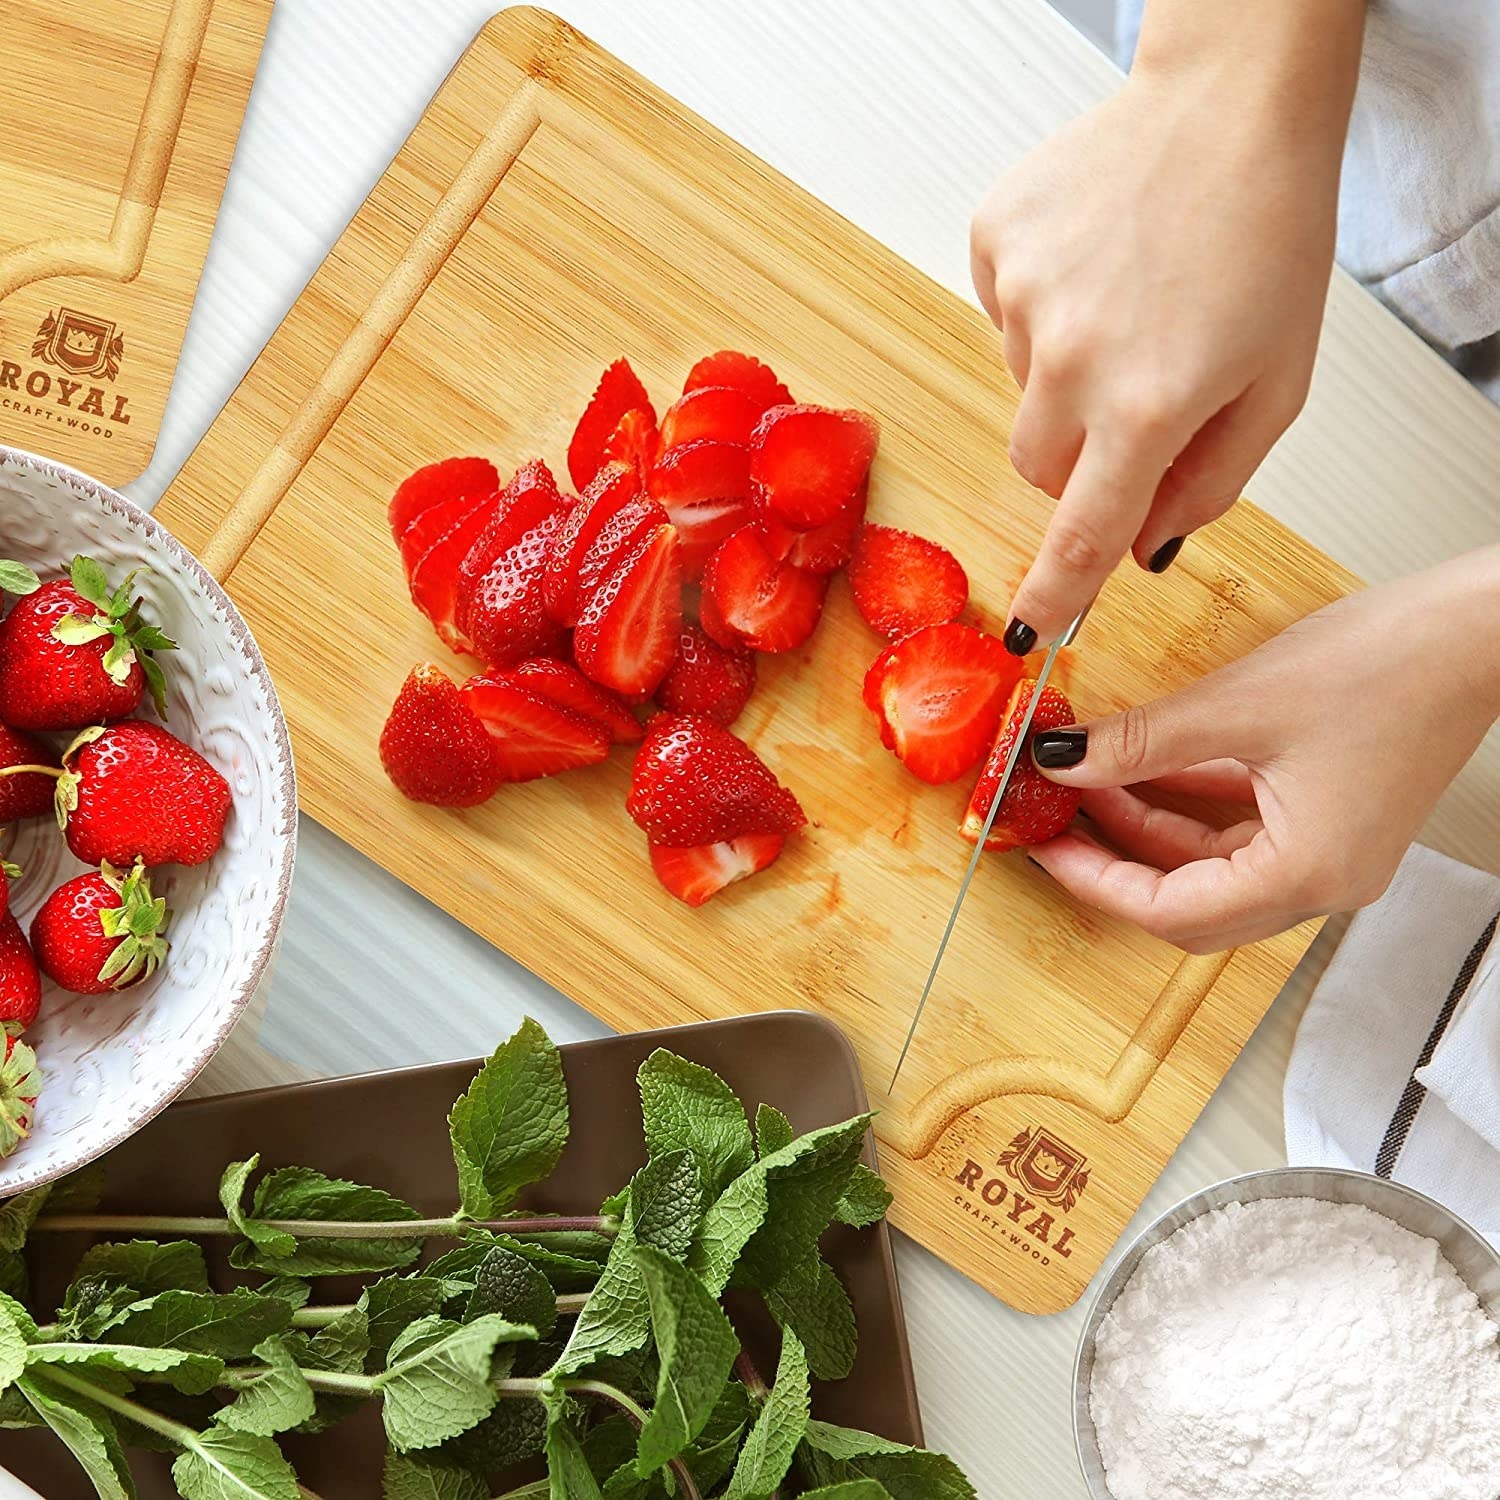 Model uses the bamboo cutting board to cut strawberries